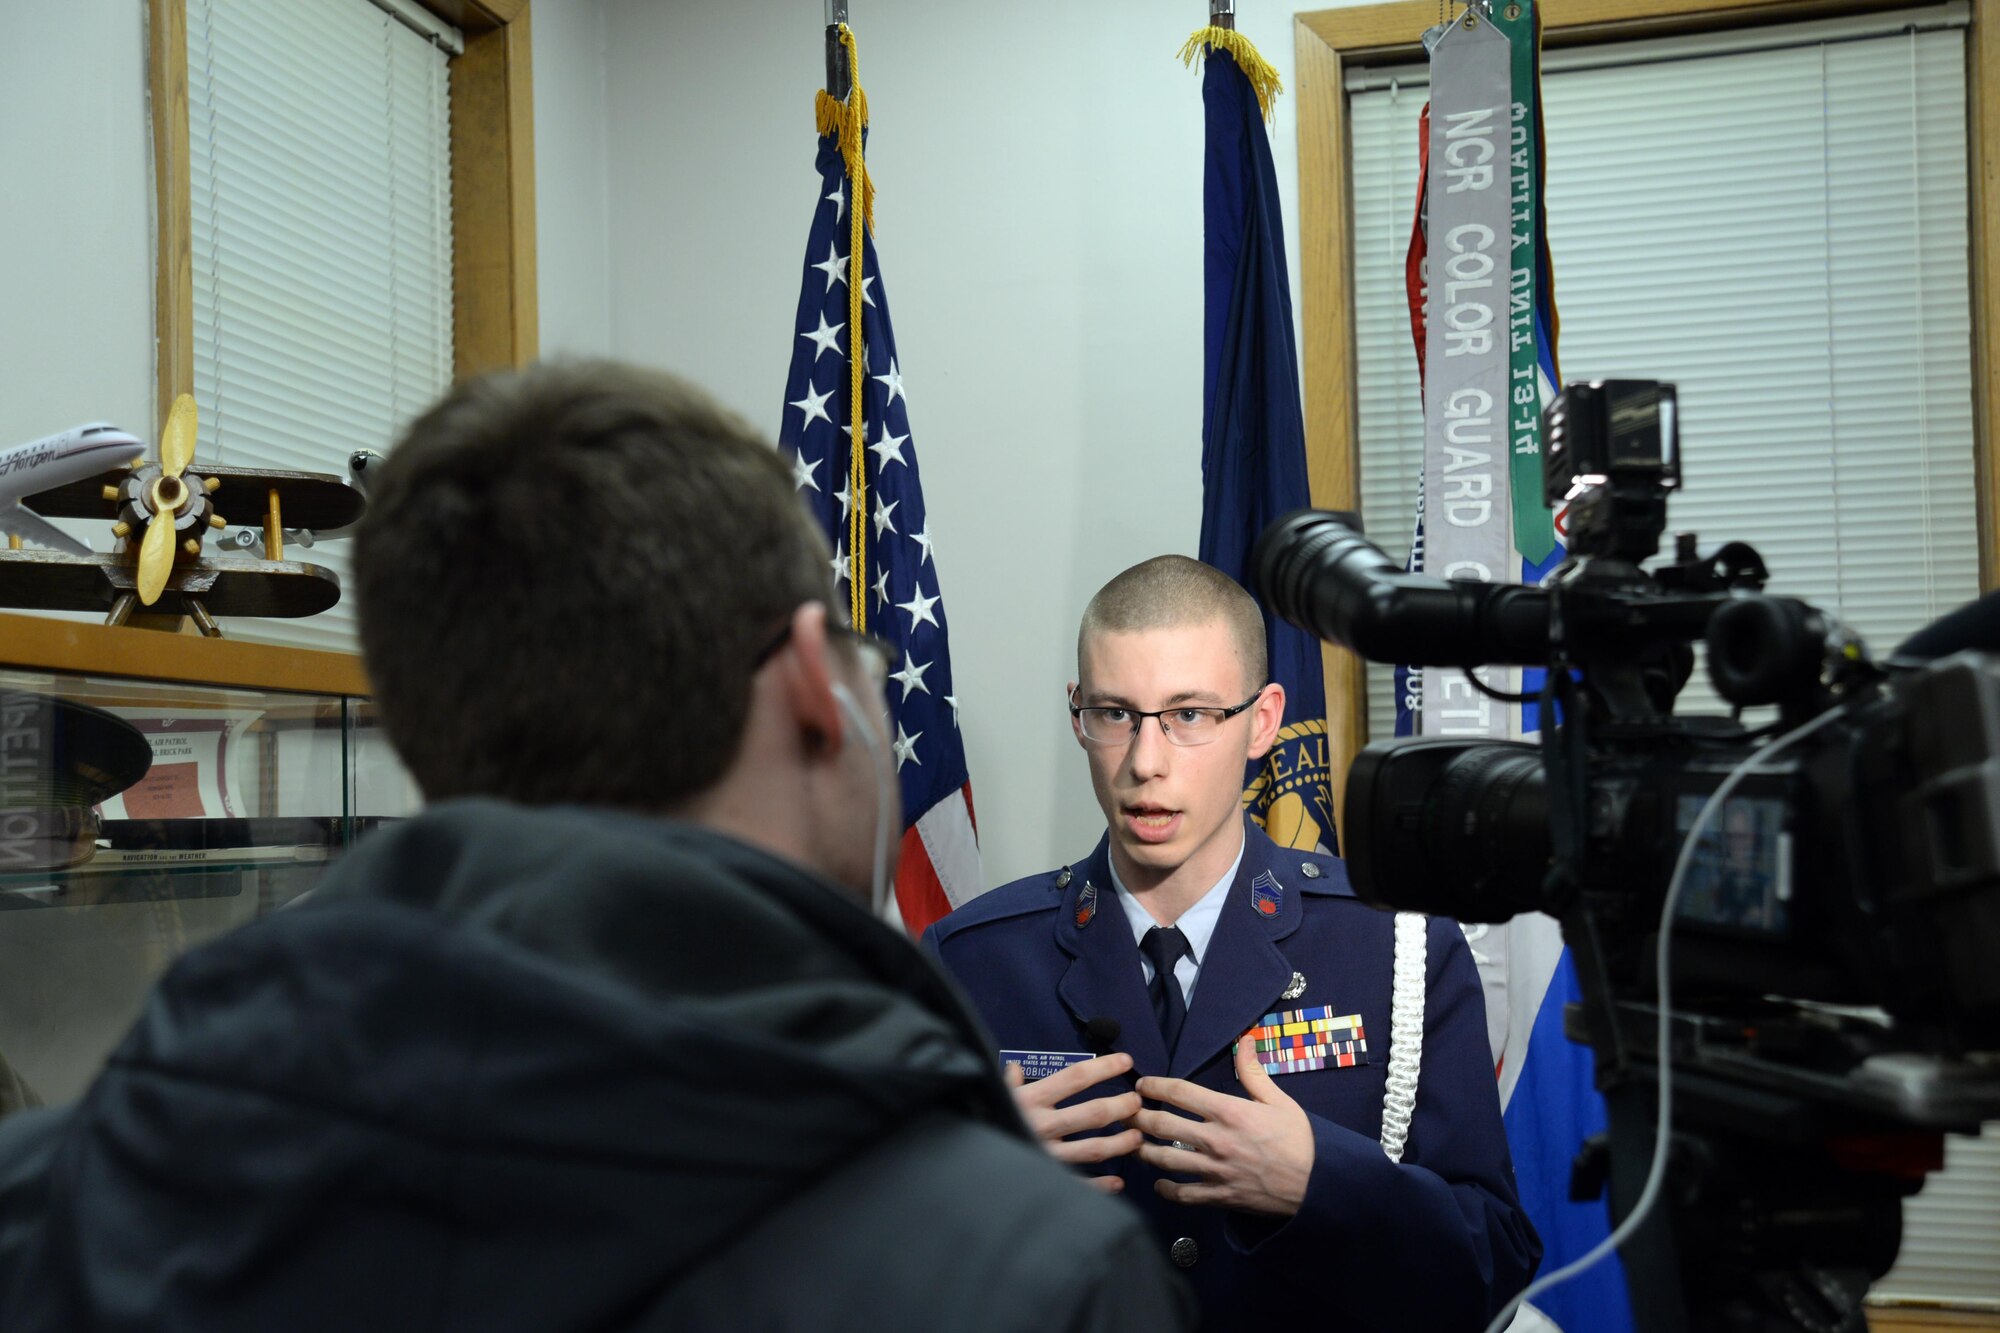 Cadet Chief Master Sgt. Any Robichaux is interviewed by local media at the Curtis E. LeMay Composite Squadron's open house March 30 at their squadron headquarters. The event showcased a new state-of-the-art cybersecurity and science, technology, engineering and mathematics (STEM) learning environment made possible by grants from a local corporate sponsor, the Offutt Officers’ Spouses’ Club and an anonymous donor. 

About 56,000 members make up CAP, which celebrated 75 years of service on Dec. 1, 2016, and consists of eight geographical regions, composed of 52 separate wings, one in each state, and Washington D.C. and Puerto Rico. The organization operates a fleet of 550 aircraft and performs about 90 percent of continental U.S. inland search and rescue missions as tasked by the Air Force Rescue Coordination Center. CAP is credited with saving an average of 78 lives every year.